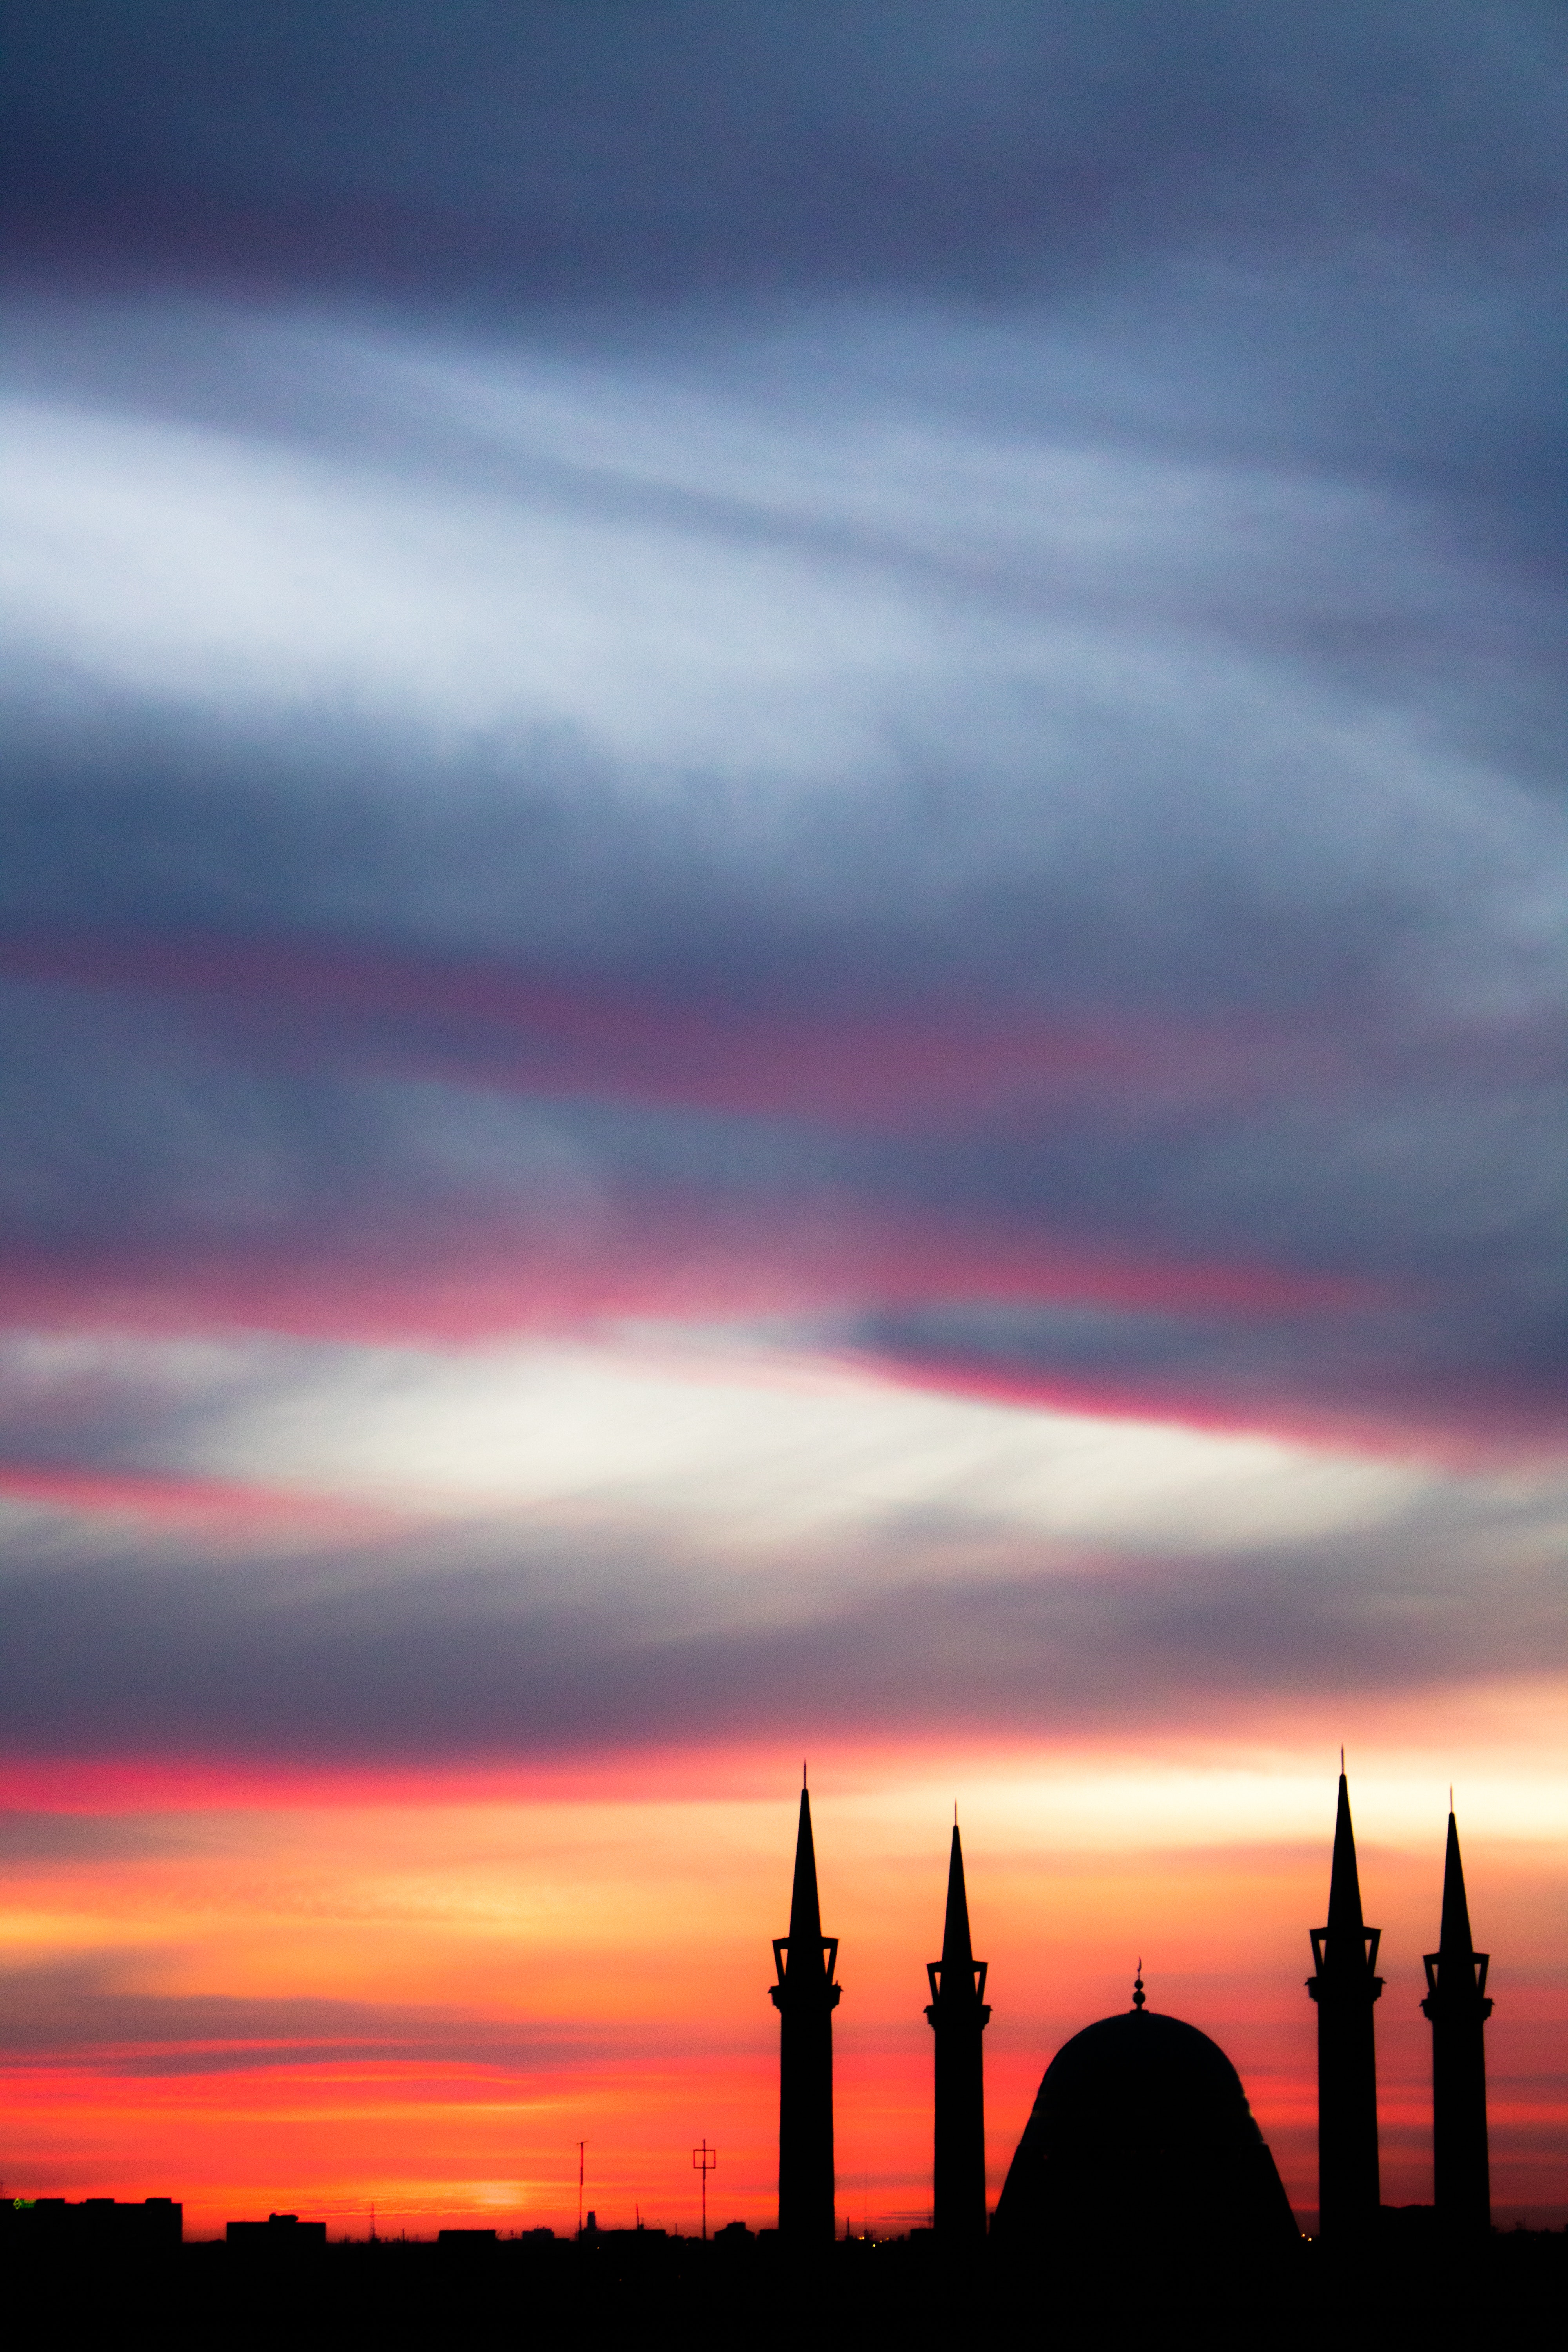 mosque, sky, architecture, cities, sunset